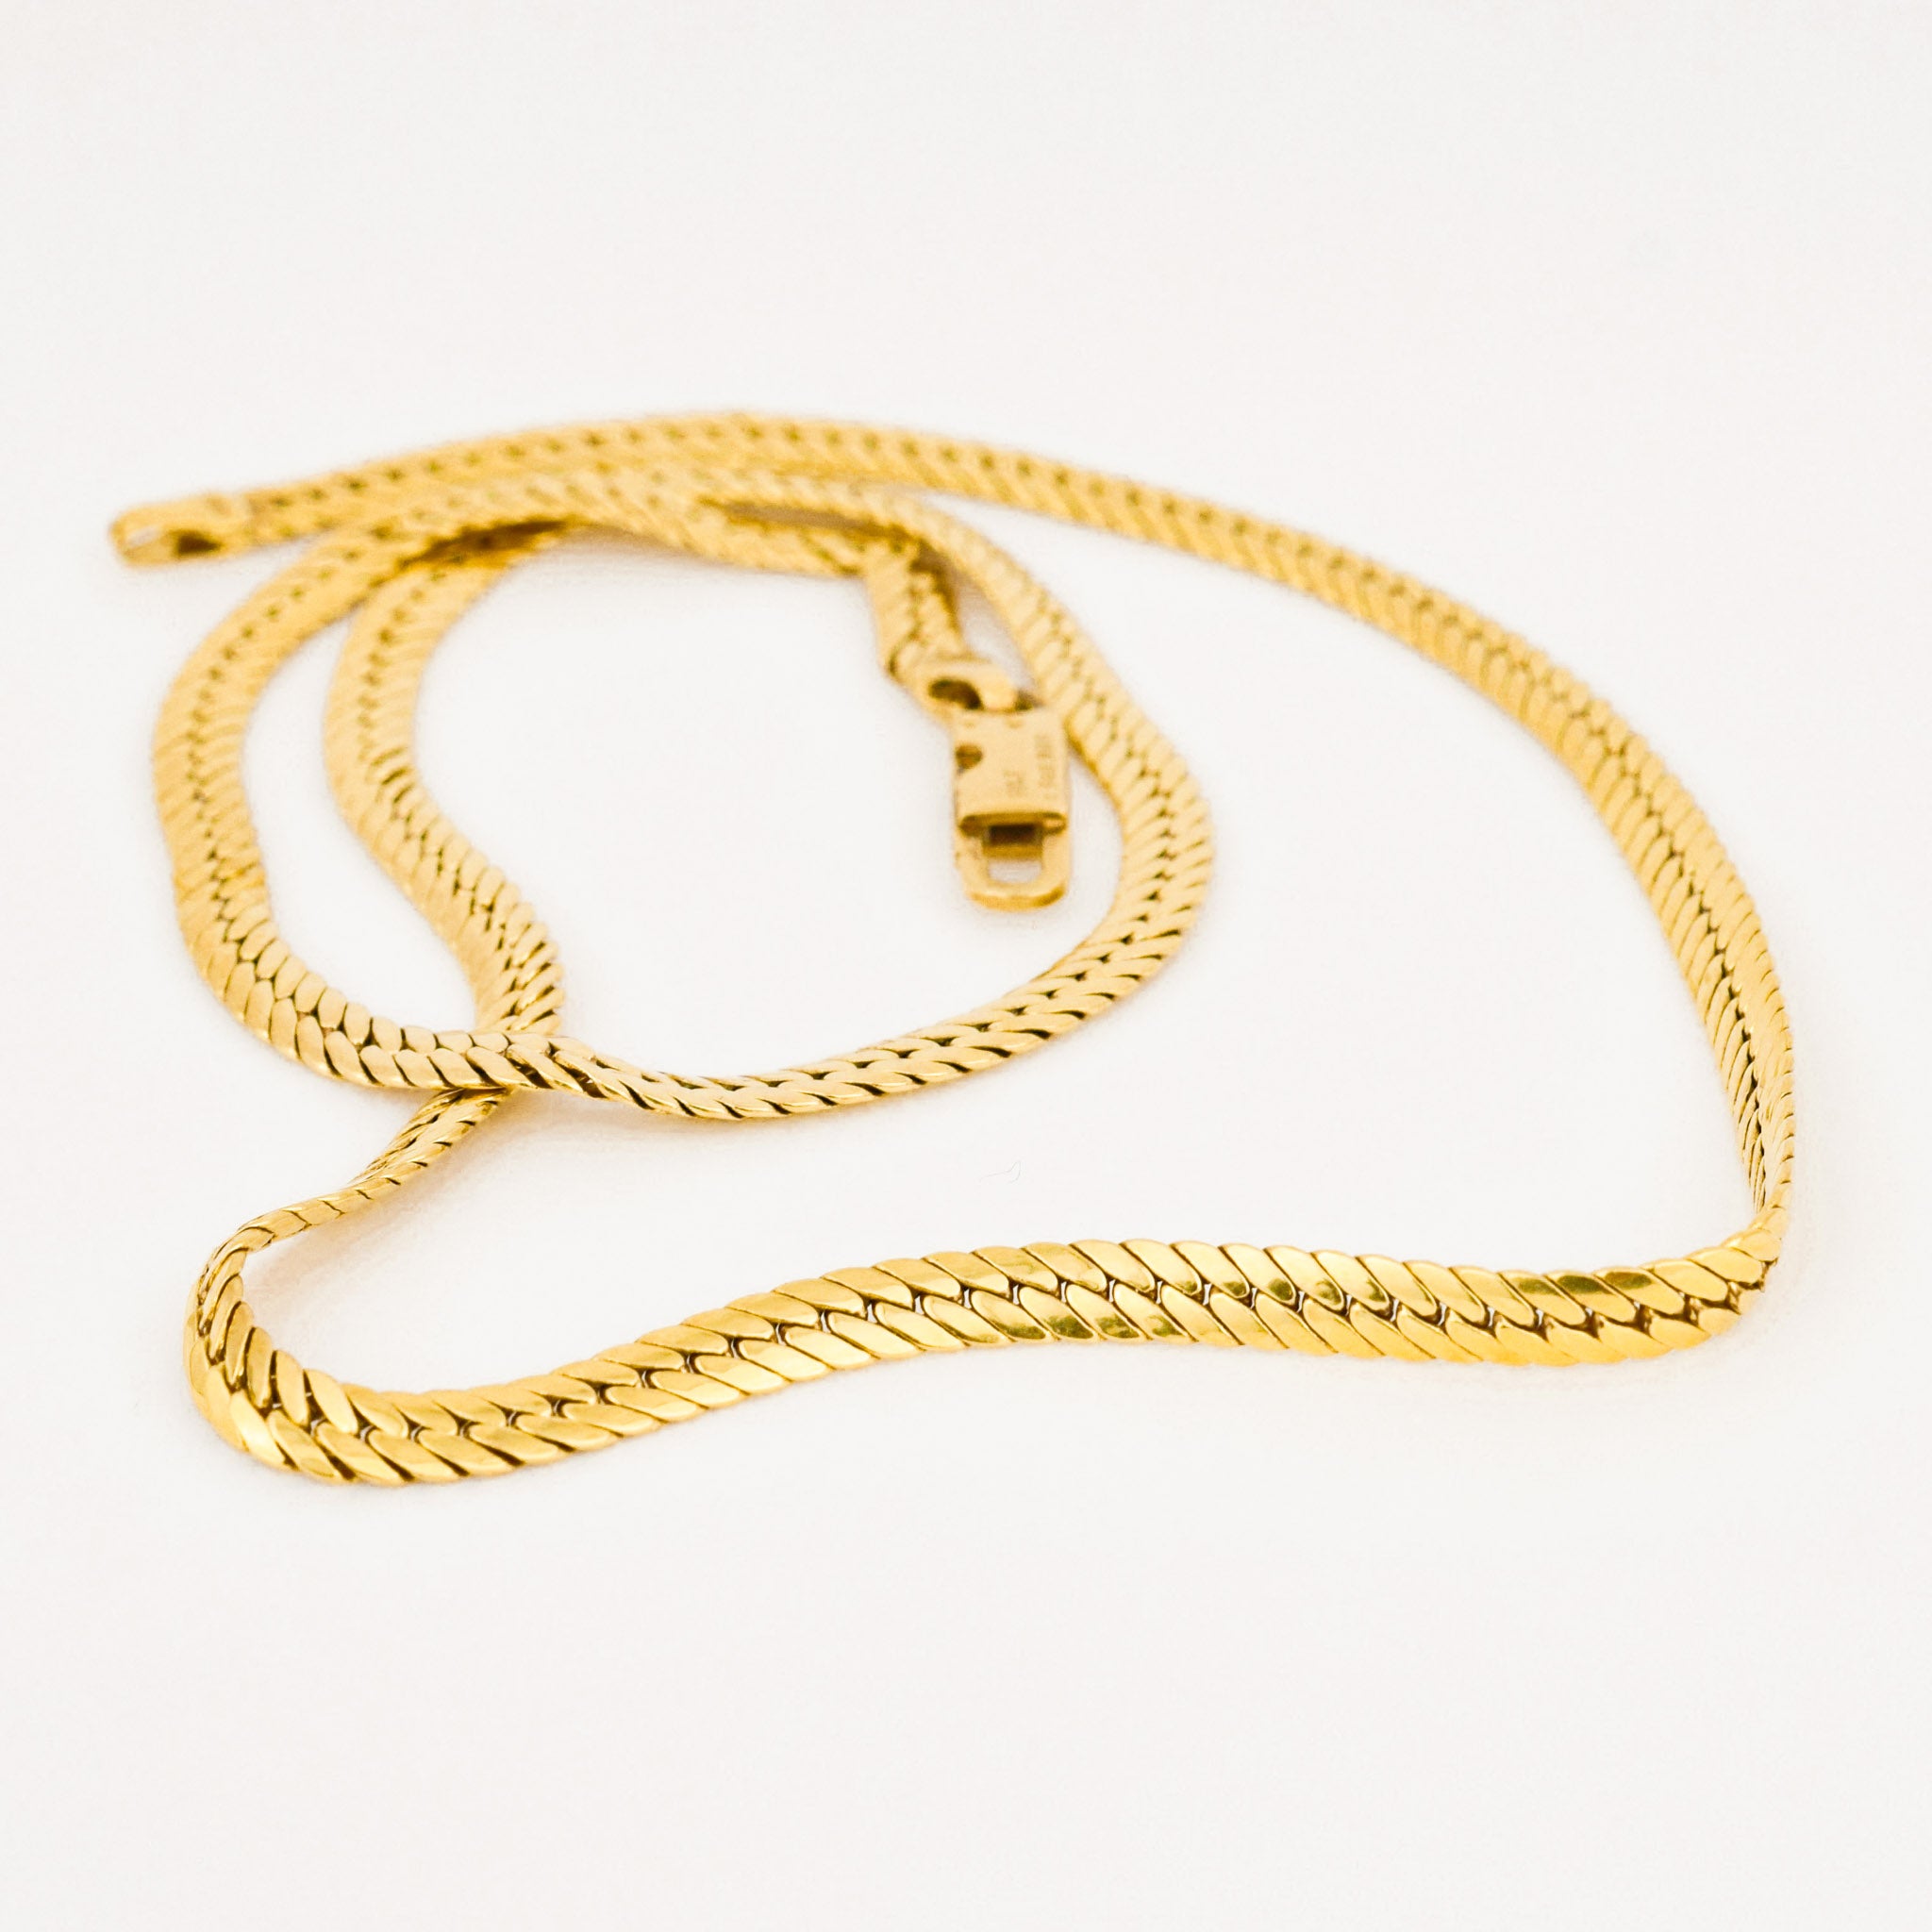 Thick Heavy Chain Mens Herringbone Necklace 18k Yellow Gold Filled Solid  Fashion Jewelry 60cm Long | Wish